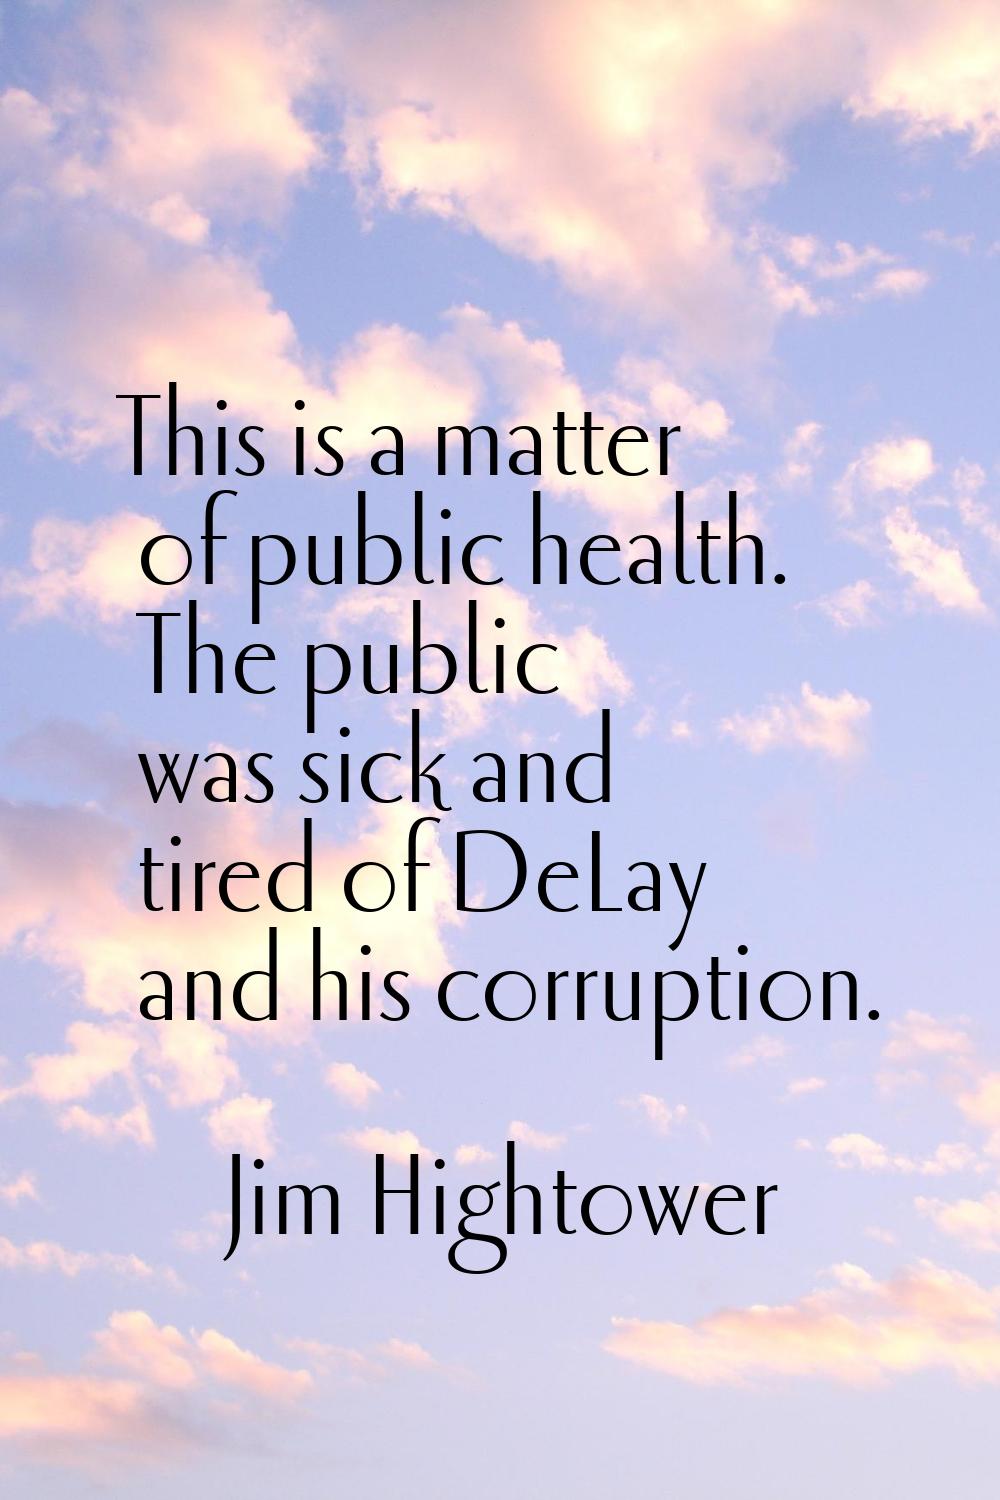 This is a matter of public health. The public was sick and tired of DeLay and his corruption.